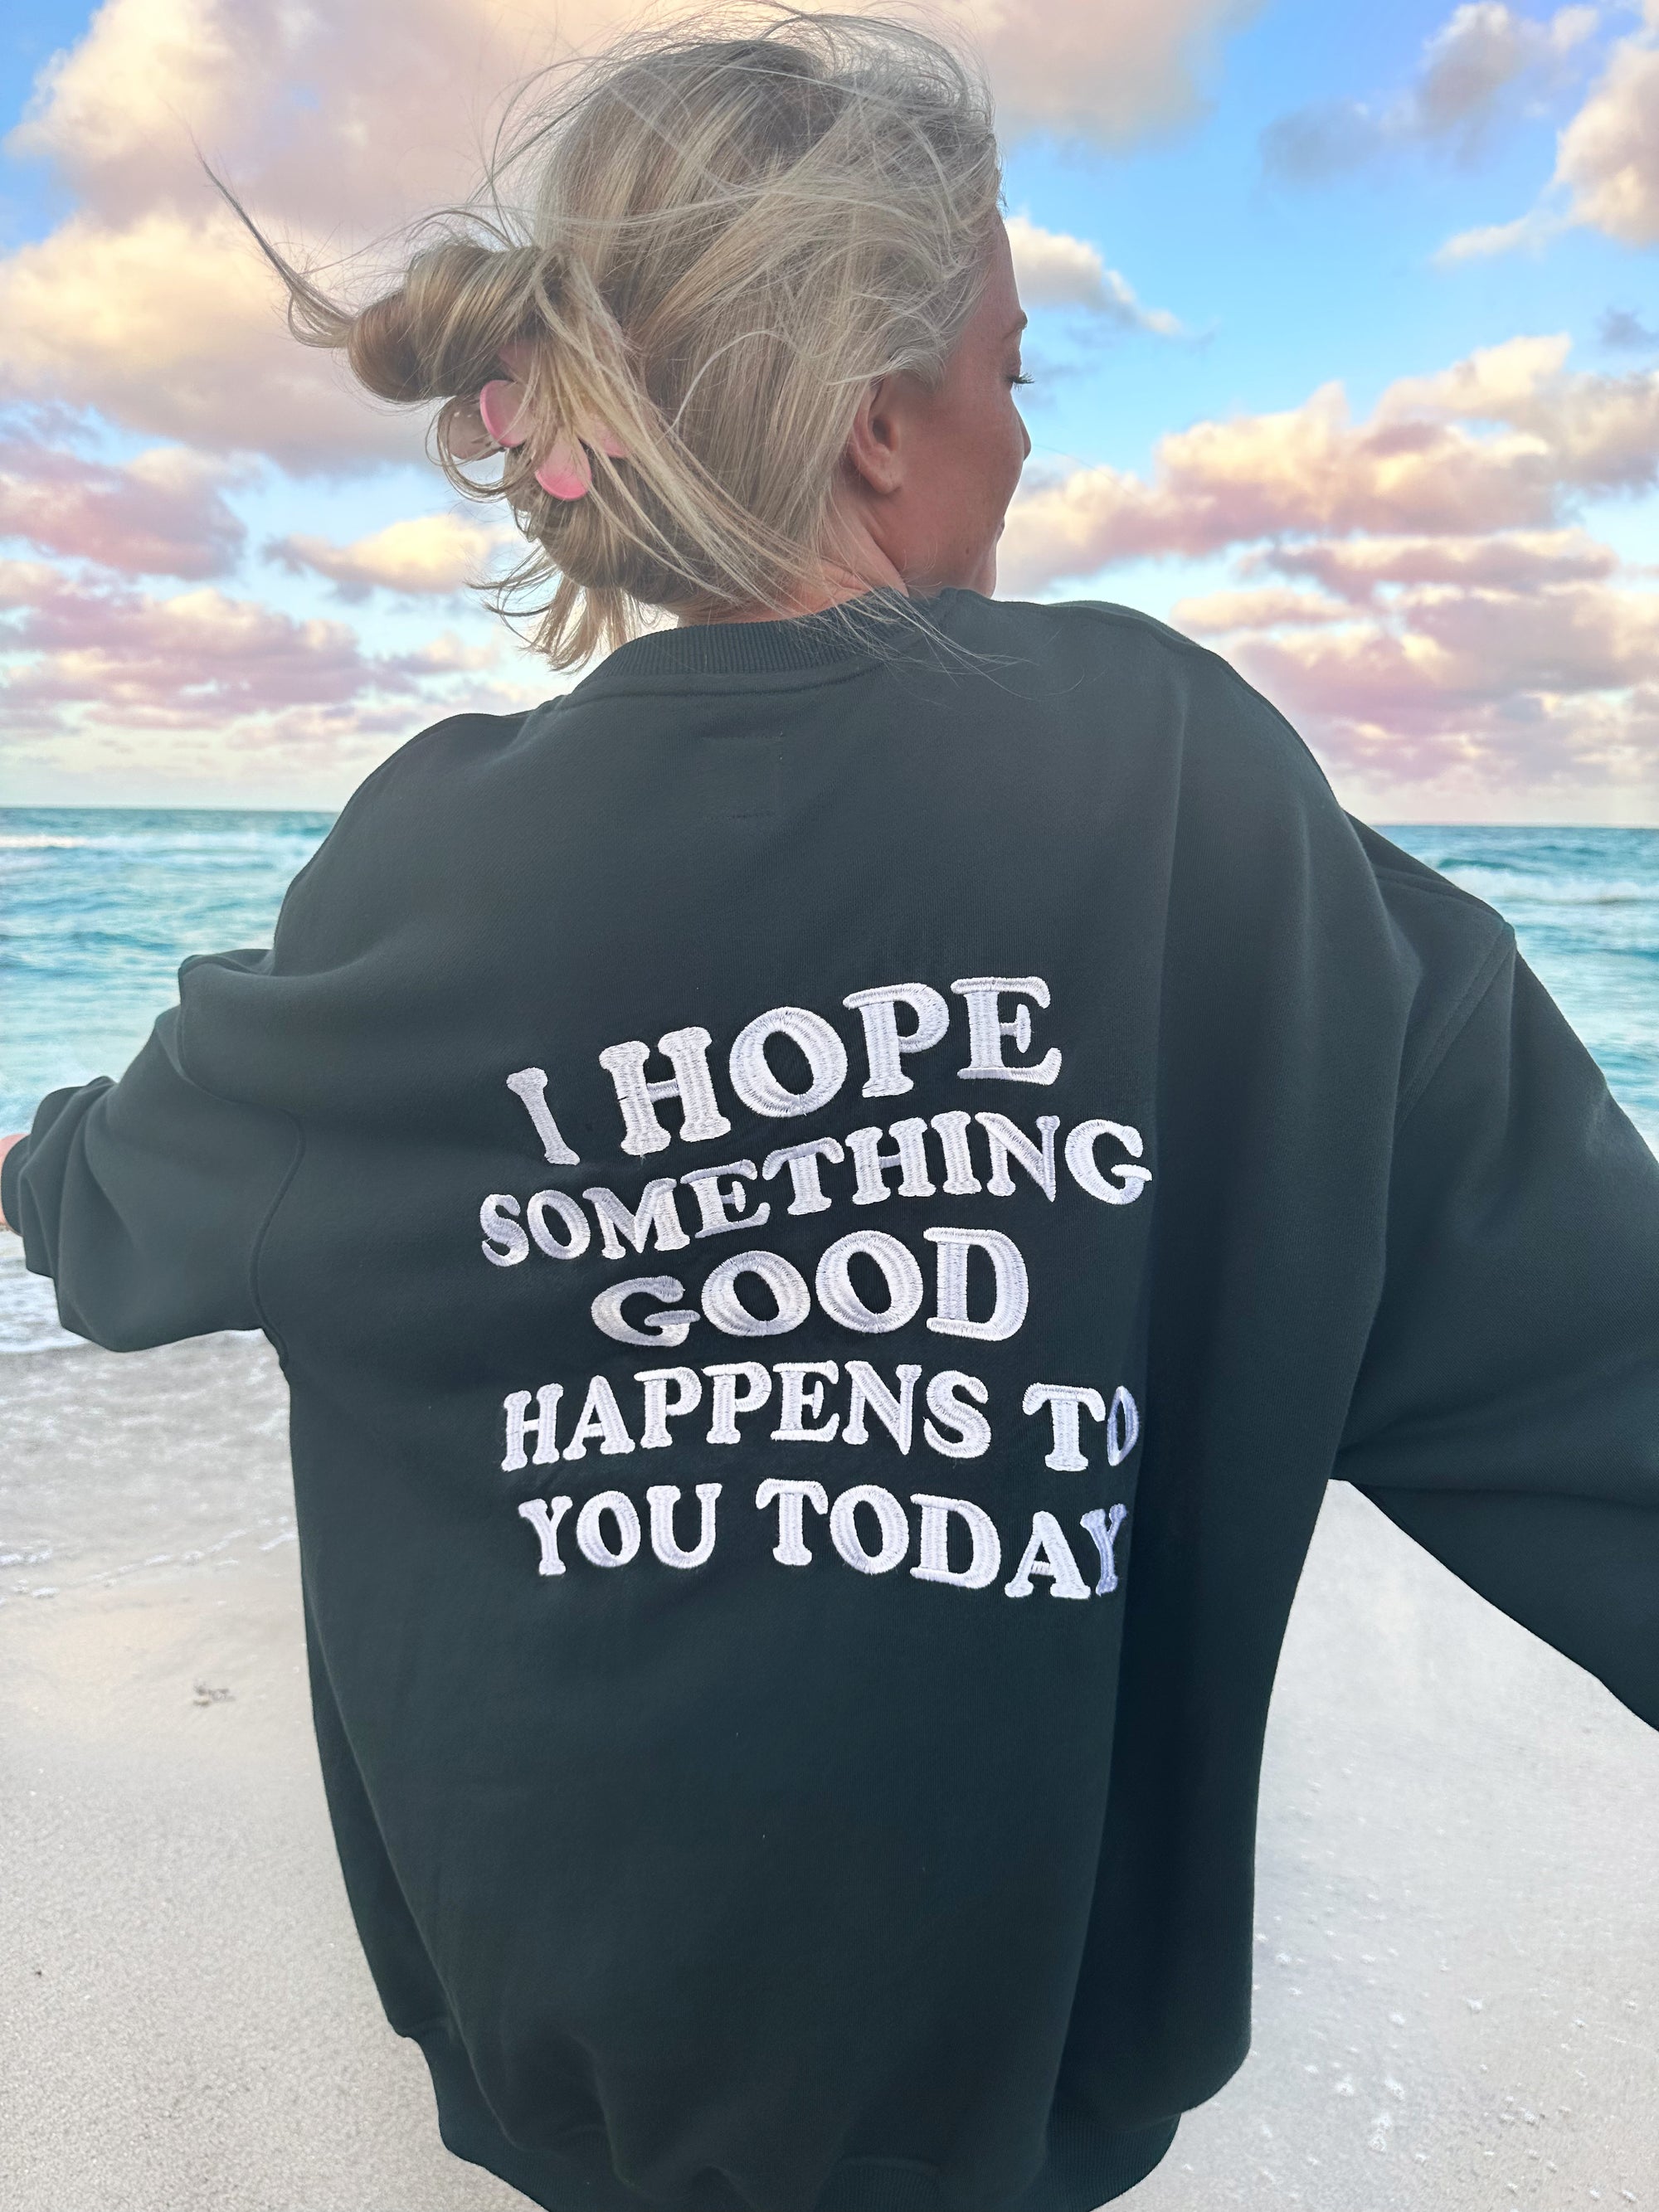 I HOPE SOMETHING GOOD HAPPENS TO YOU TODAY EMBROIDER SWEATSHIRT - Sunkissedcoconut